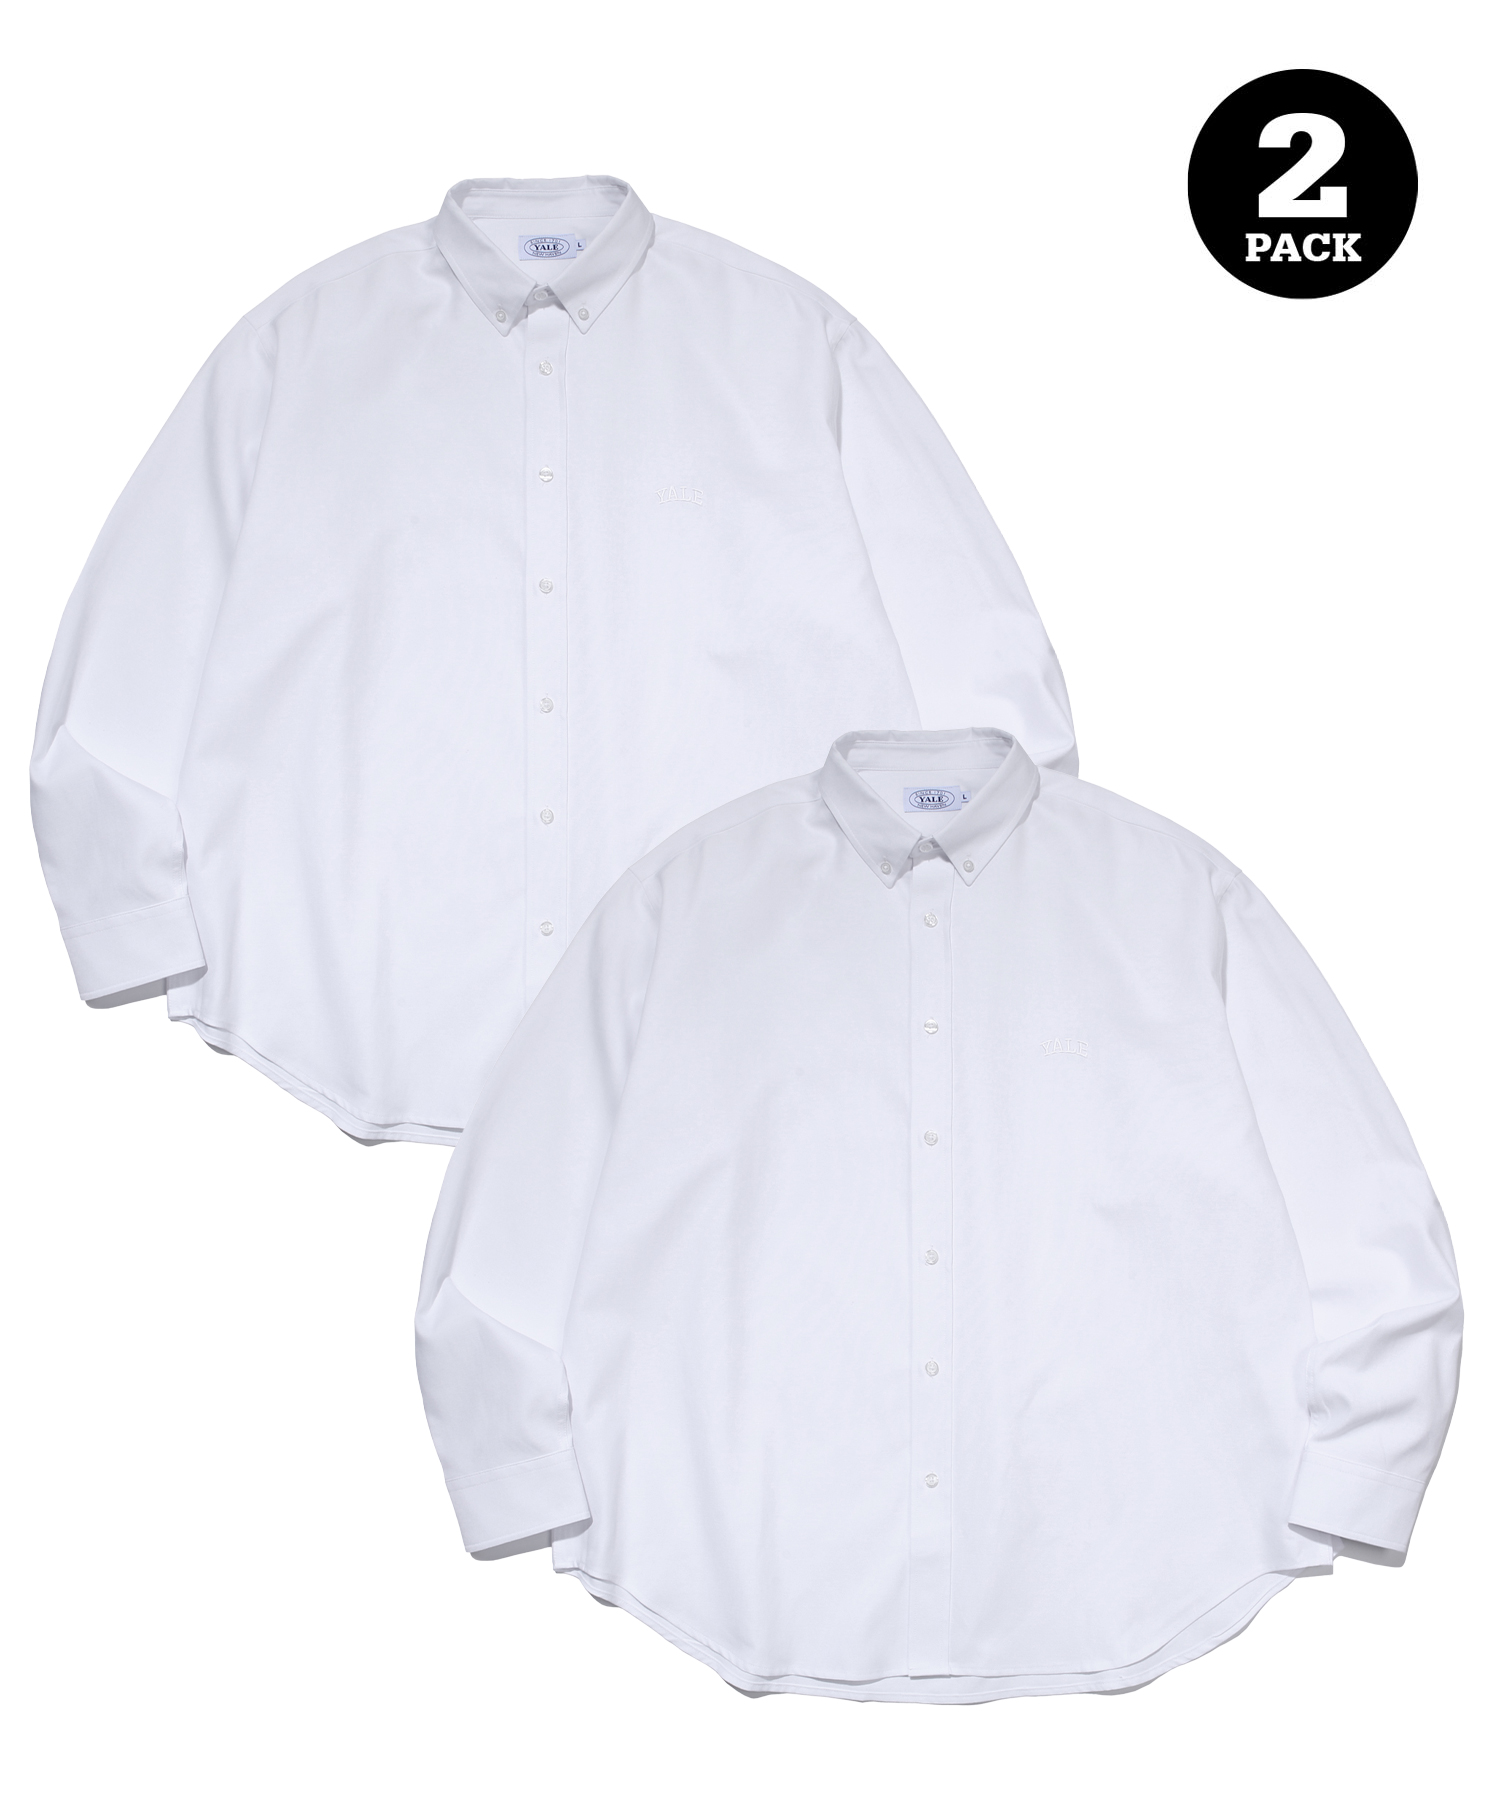 (24SS) [ONEMILE WEAR] 2PACK OXFORD BIG SHIRT WHITE / BLUE